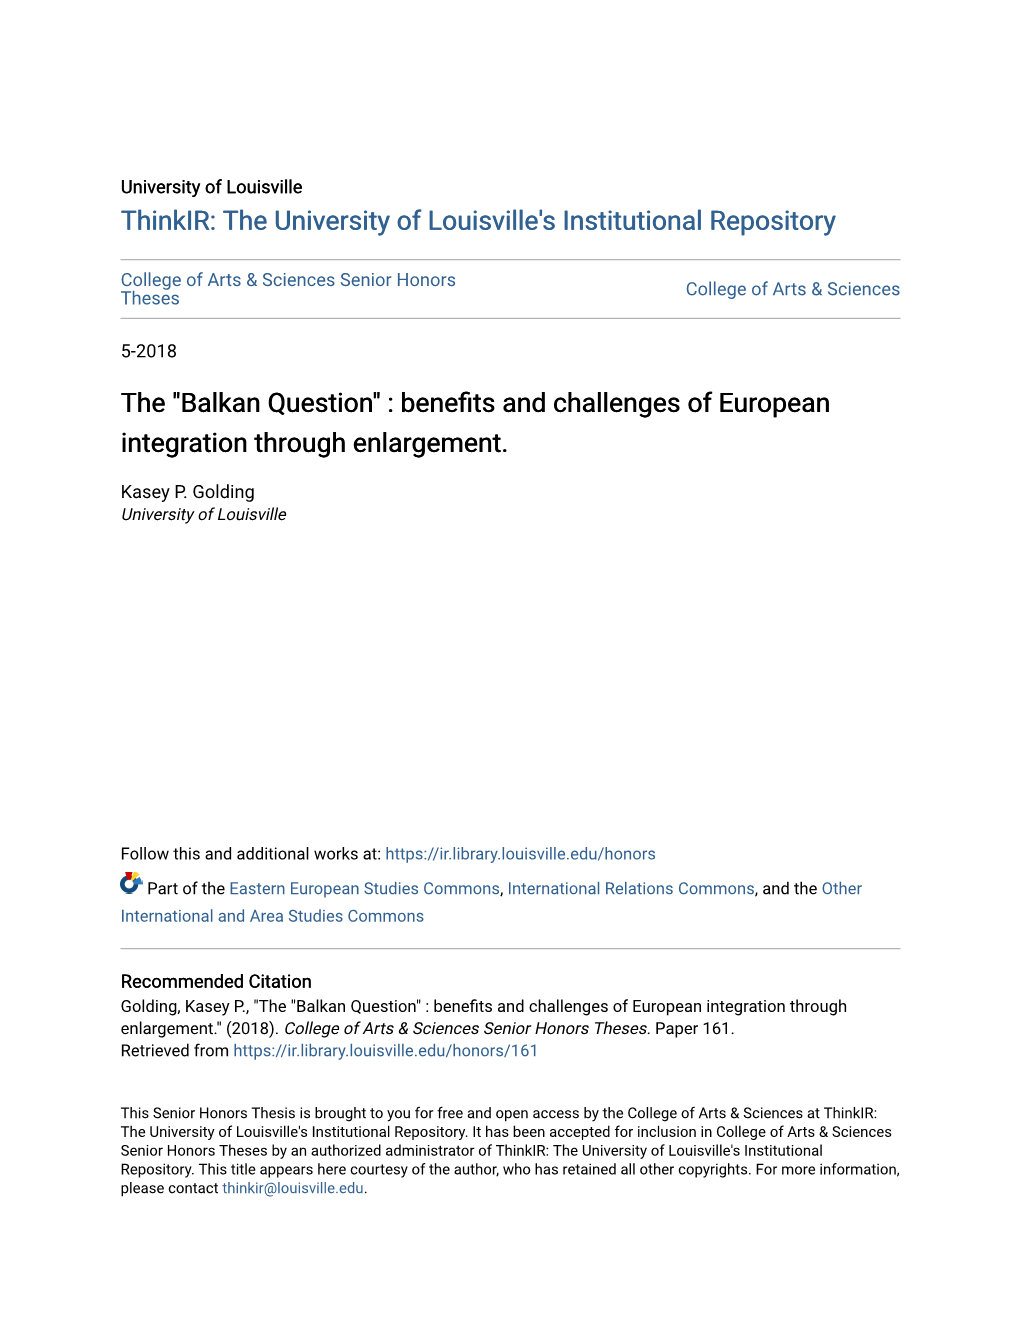 Benefits and Challenges of European Integration Through Enlargement." (2018)